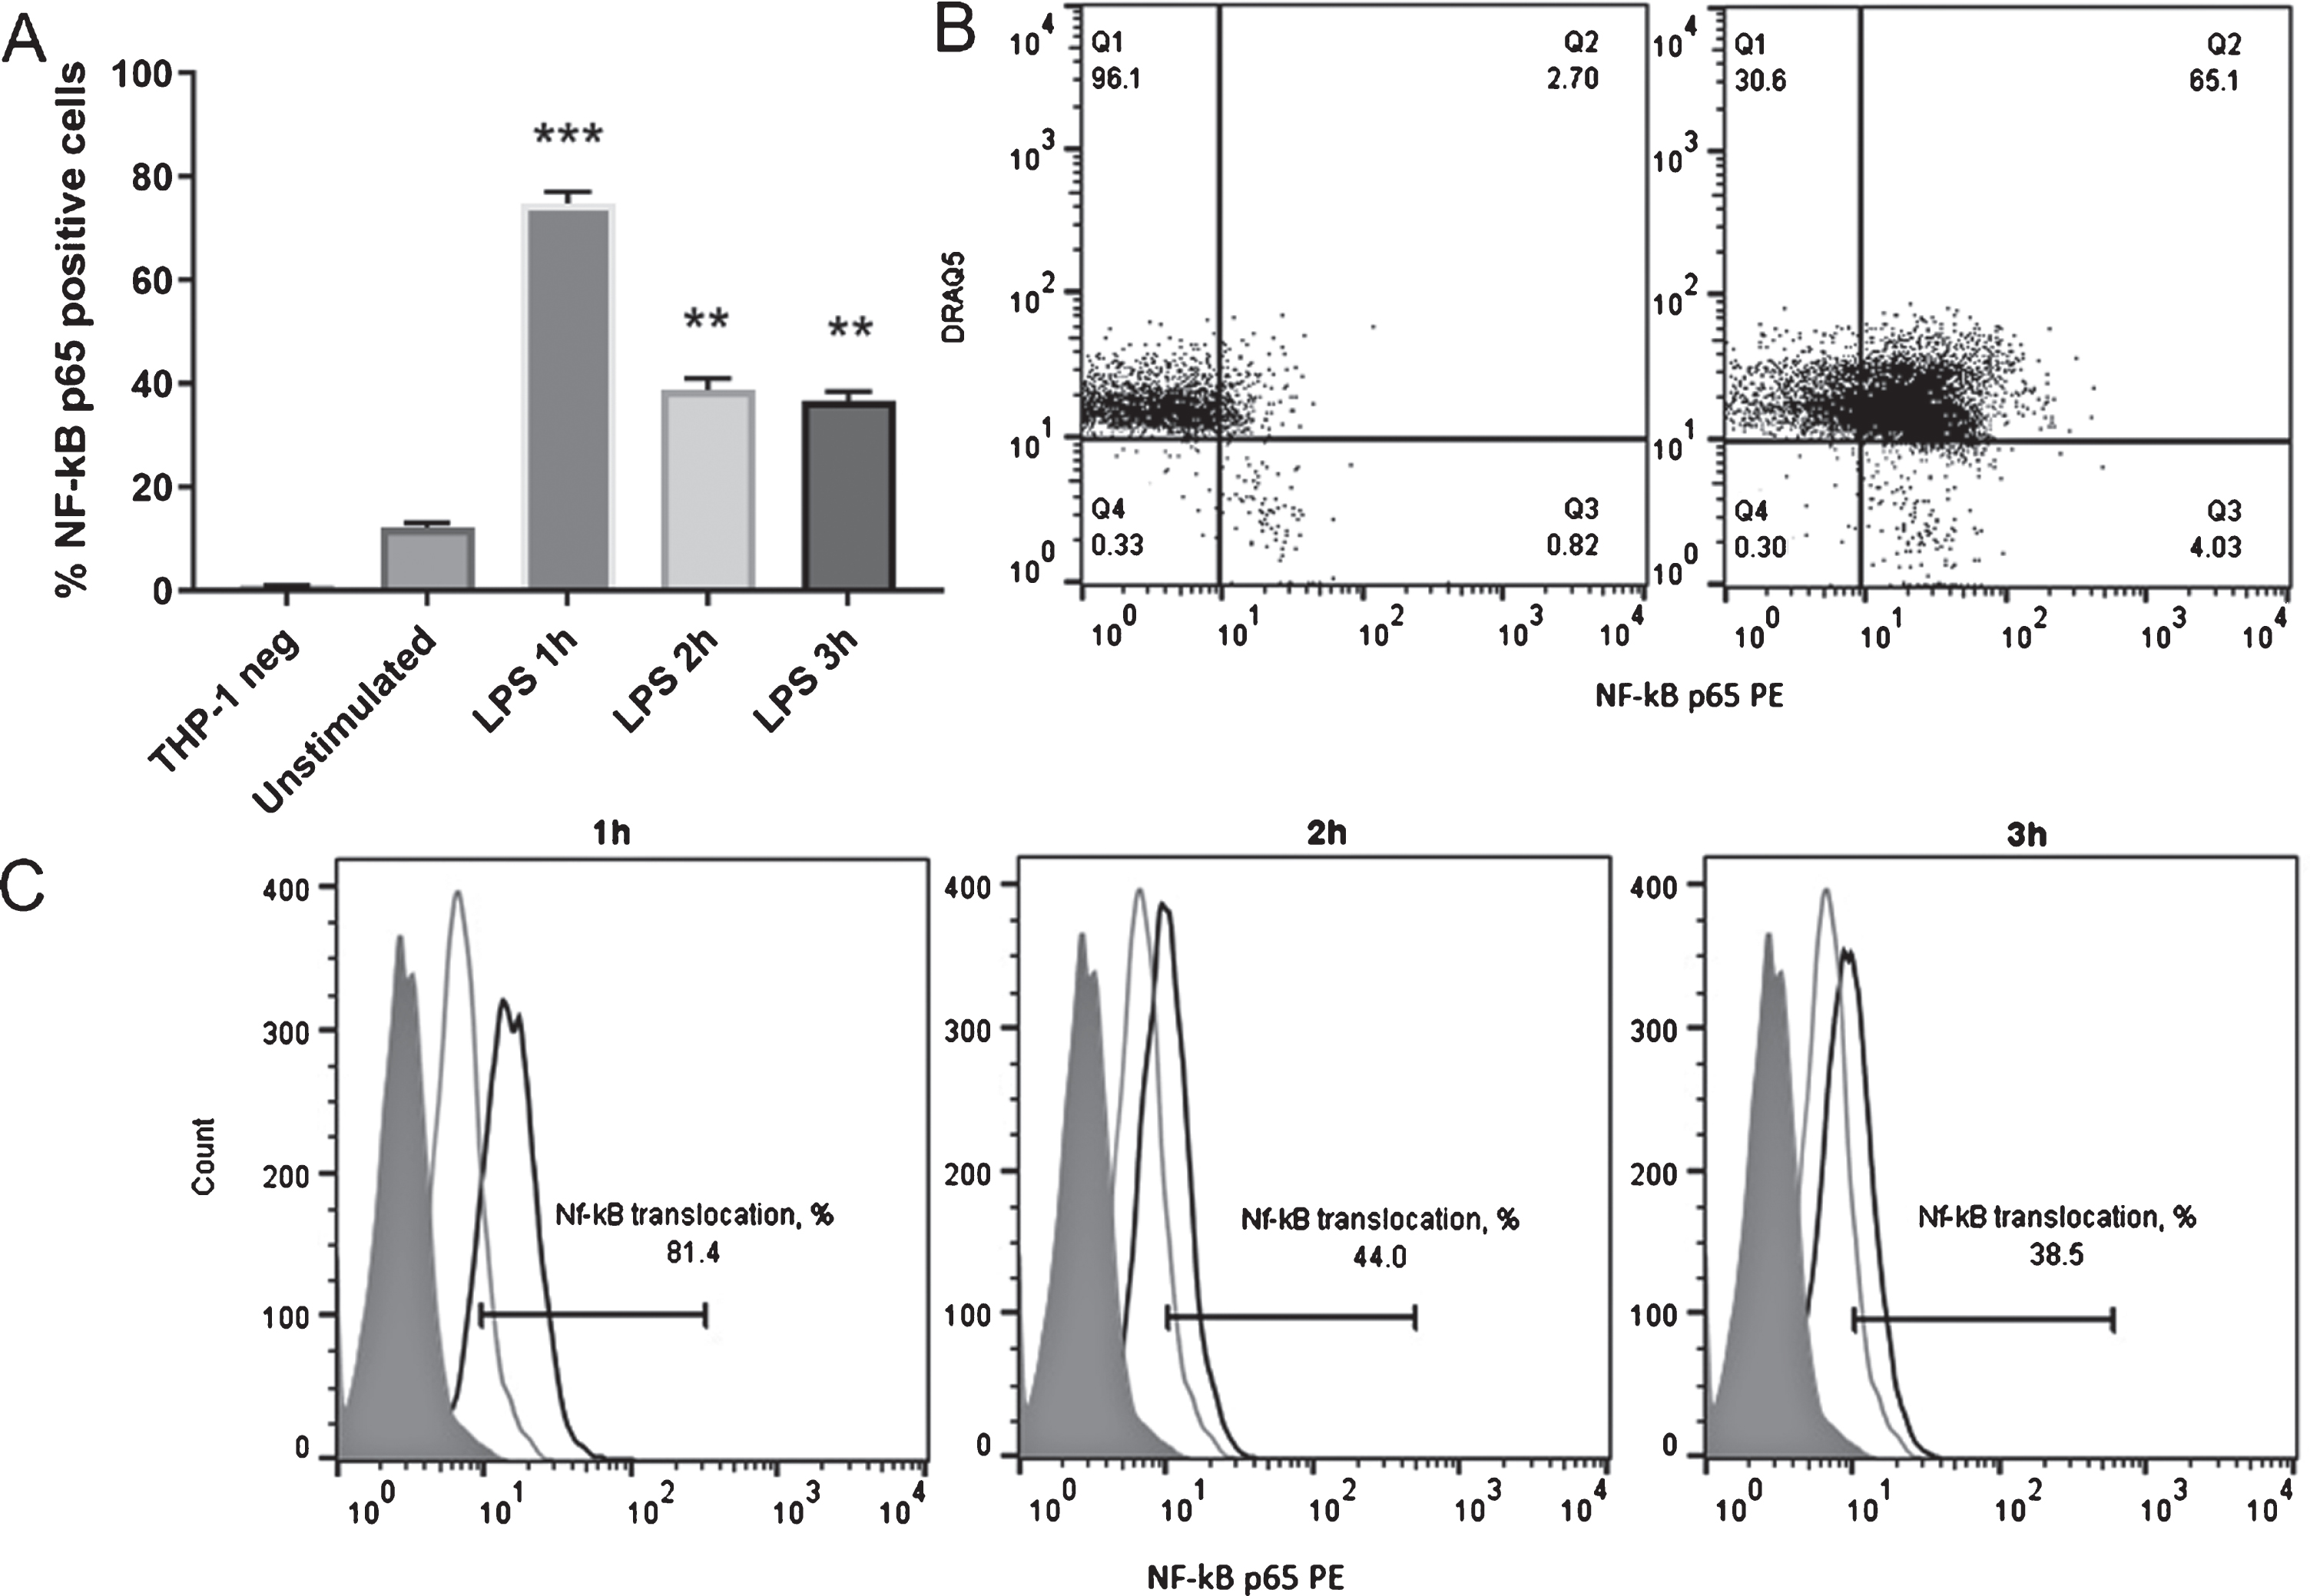 The dynamics of NF-κB nuclear translocation in LPS-stimulated THP-1 cells. A – the percentage of THP-1 cells with NF-κB nuclear translocation after LPS stimulus (THP-1 neg is the unstained control) (n = 3). B – flow cytometry results of anti-NF-κB p65 PE and DRAQ5 co-staining in unstimulated THP-1 cells (left) and LPS-stimulated cells (right). Representative data are shown. C – flow cytometry analysis of NF-κB nuclear translocation dynamics in THP-1 cells after stimulation with LPS. The filled histogram shows the unstained cell control, the black line shows NF-κB p65 PE staining in LPS-stimulated THP-1 cells, and the gray line shows NF-κB p65 PE staining in unstimulated THP-1 cells. Representative data are shown. Statistical significance was expressed as **P < 0.01 and ***P < 0.001 compared with the response of unstimulated THP-1 cells.